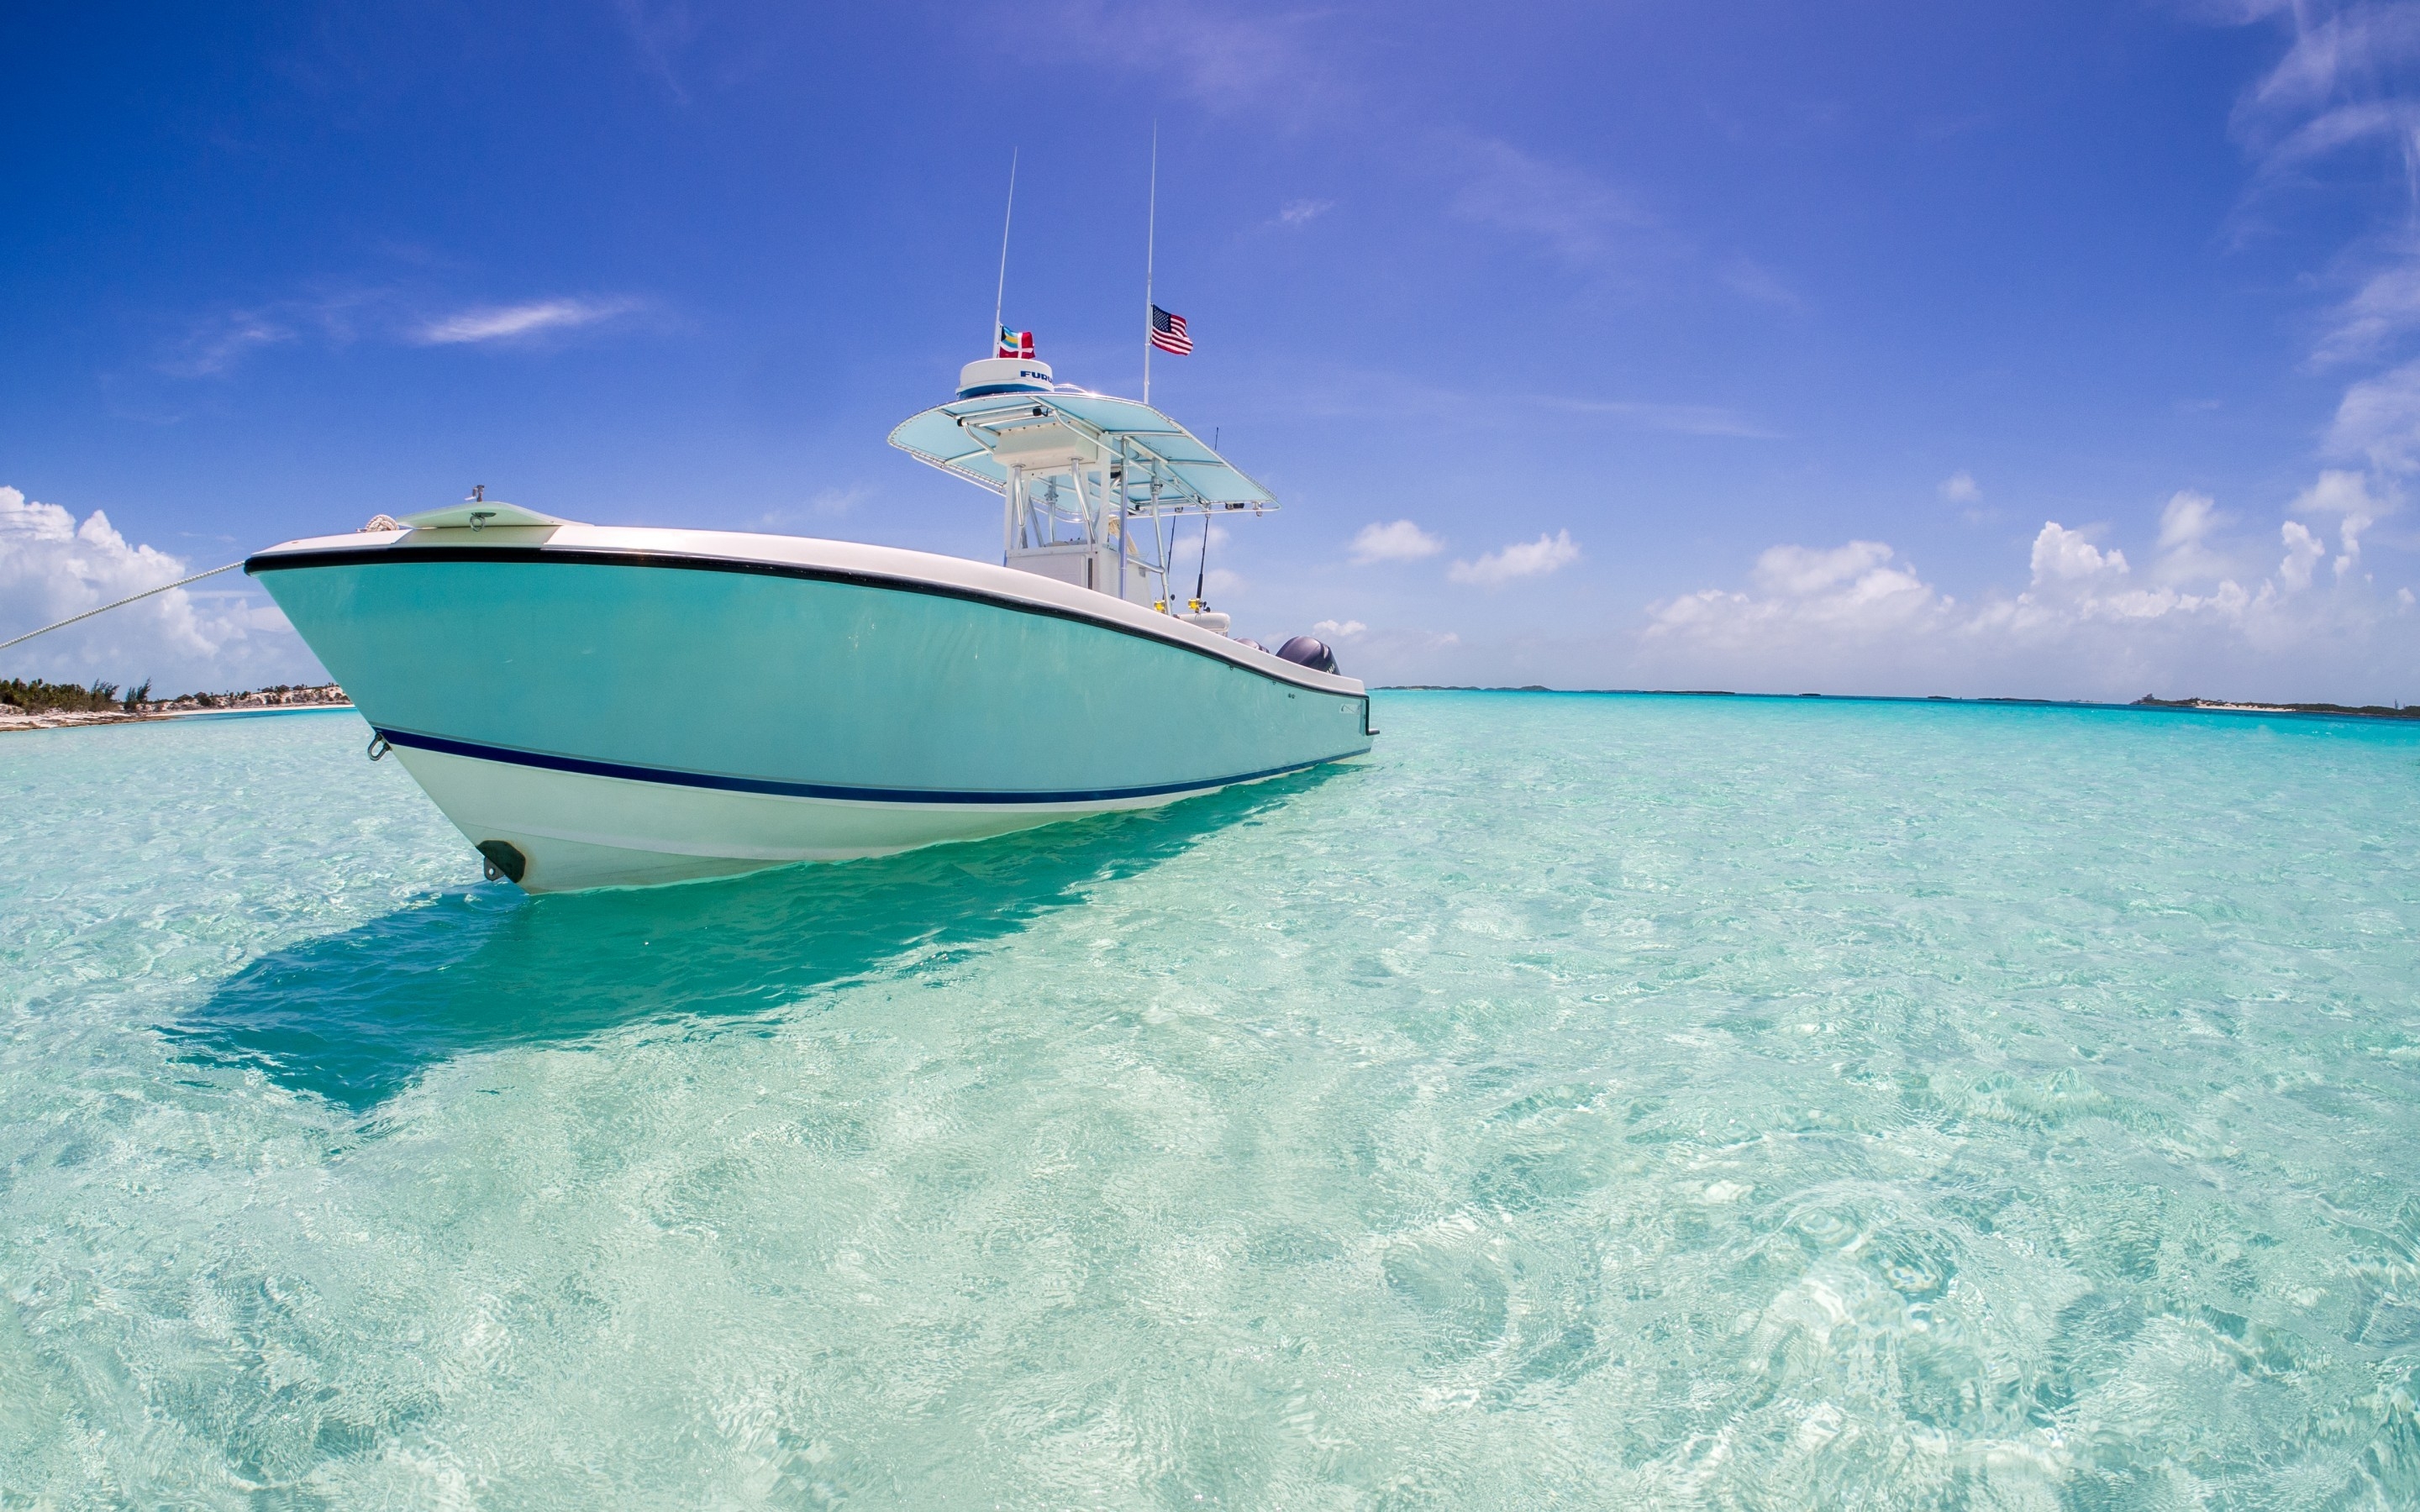 Boat in Paradise for 2880 x 1800 Retina Display resolution